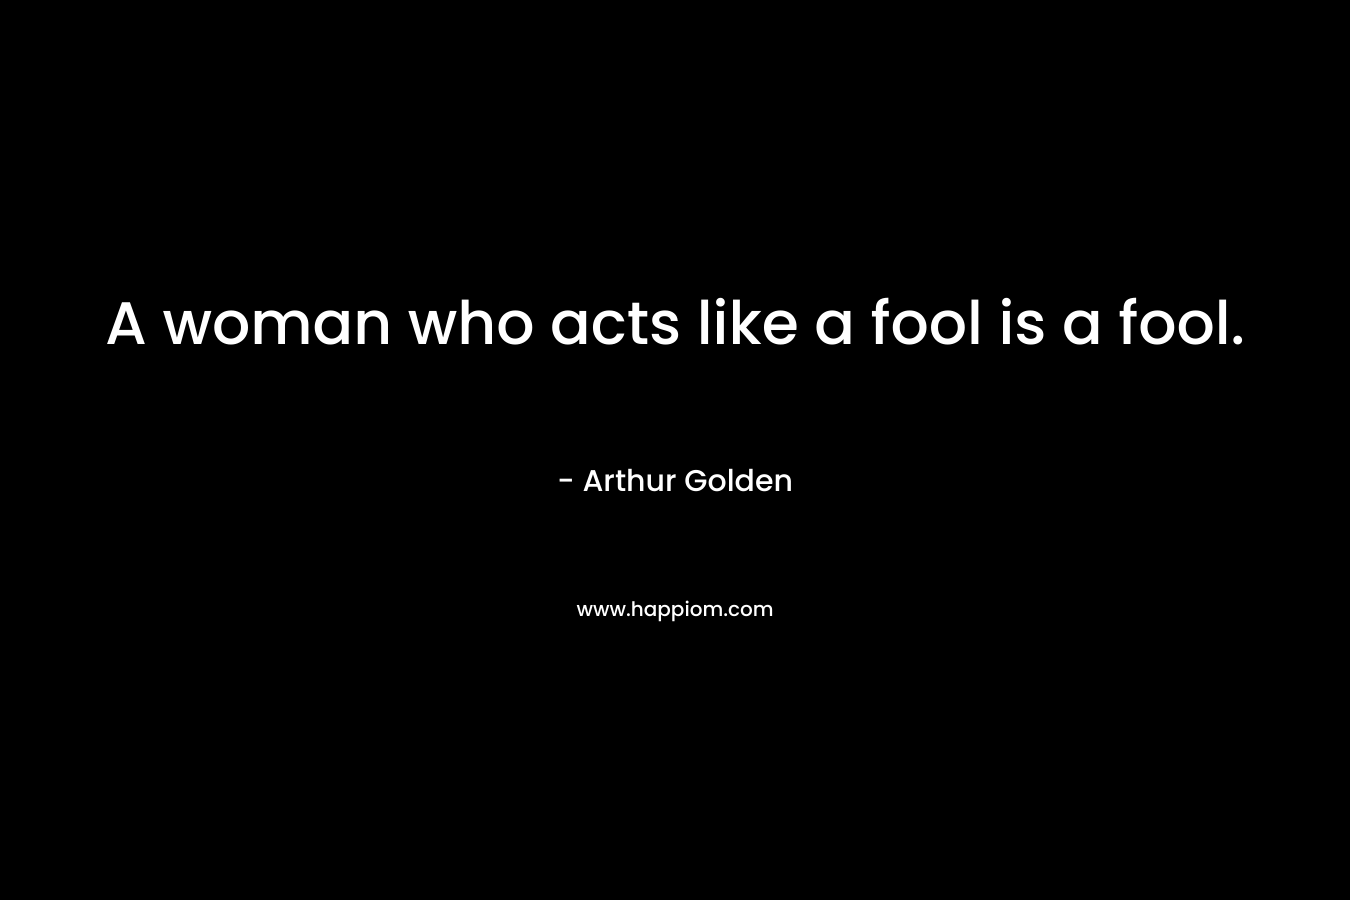 A woman who acts like a fool is a fool.